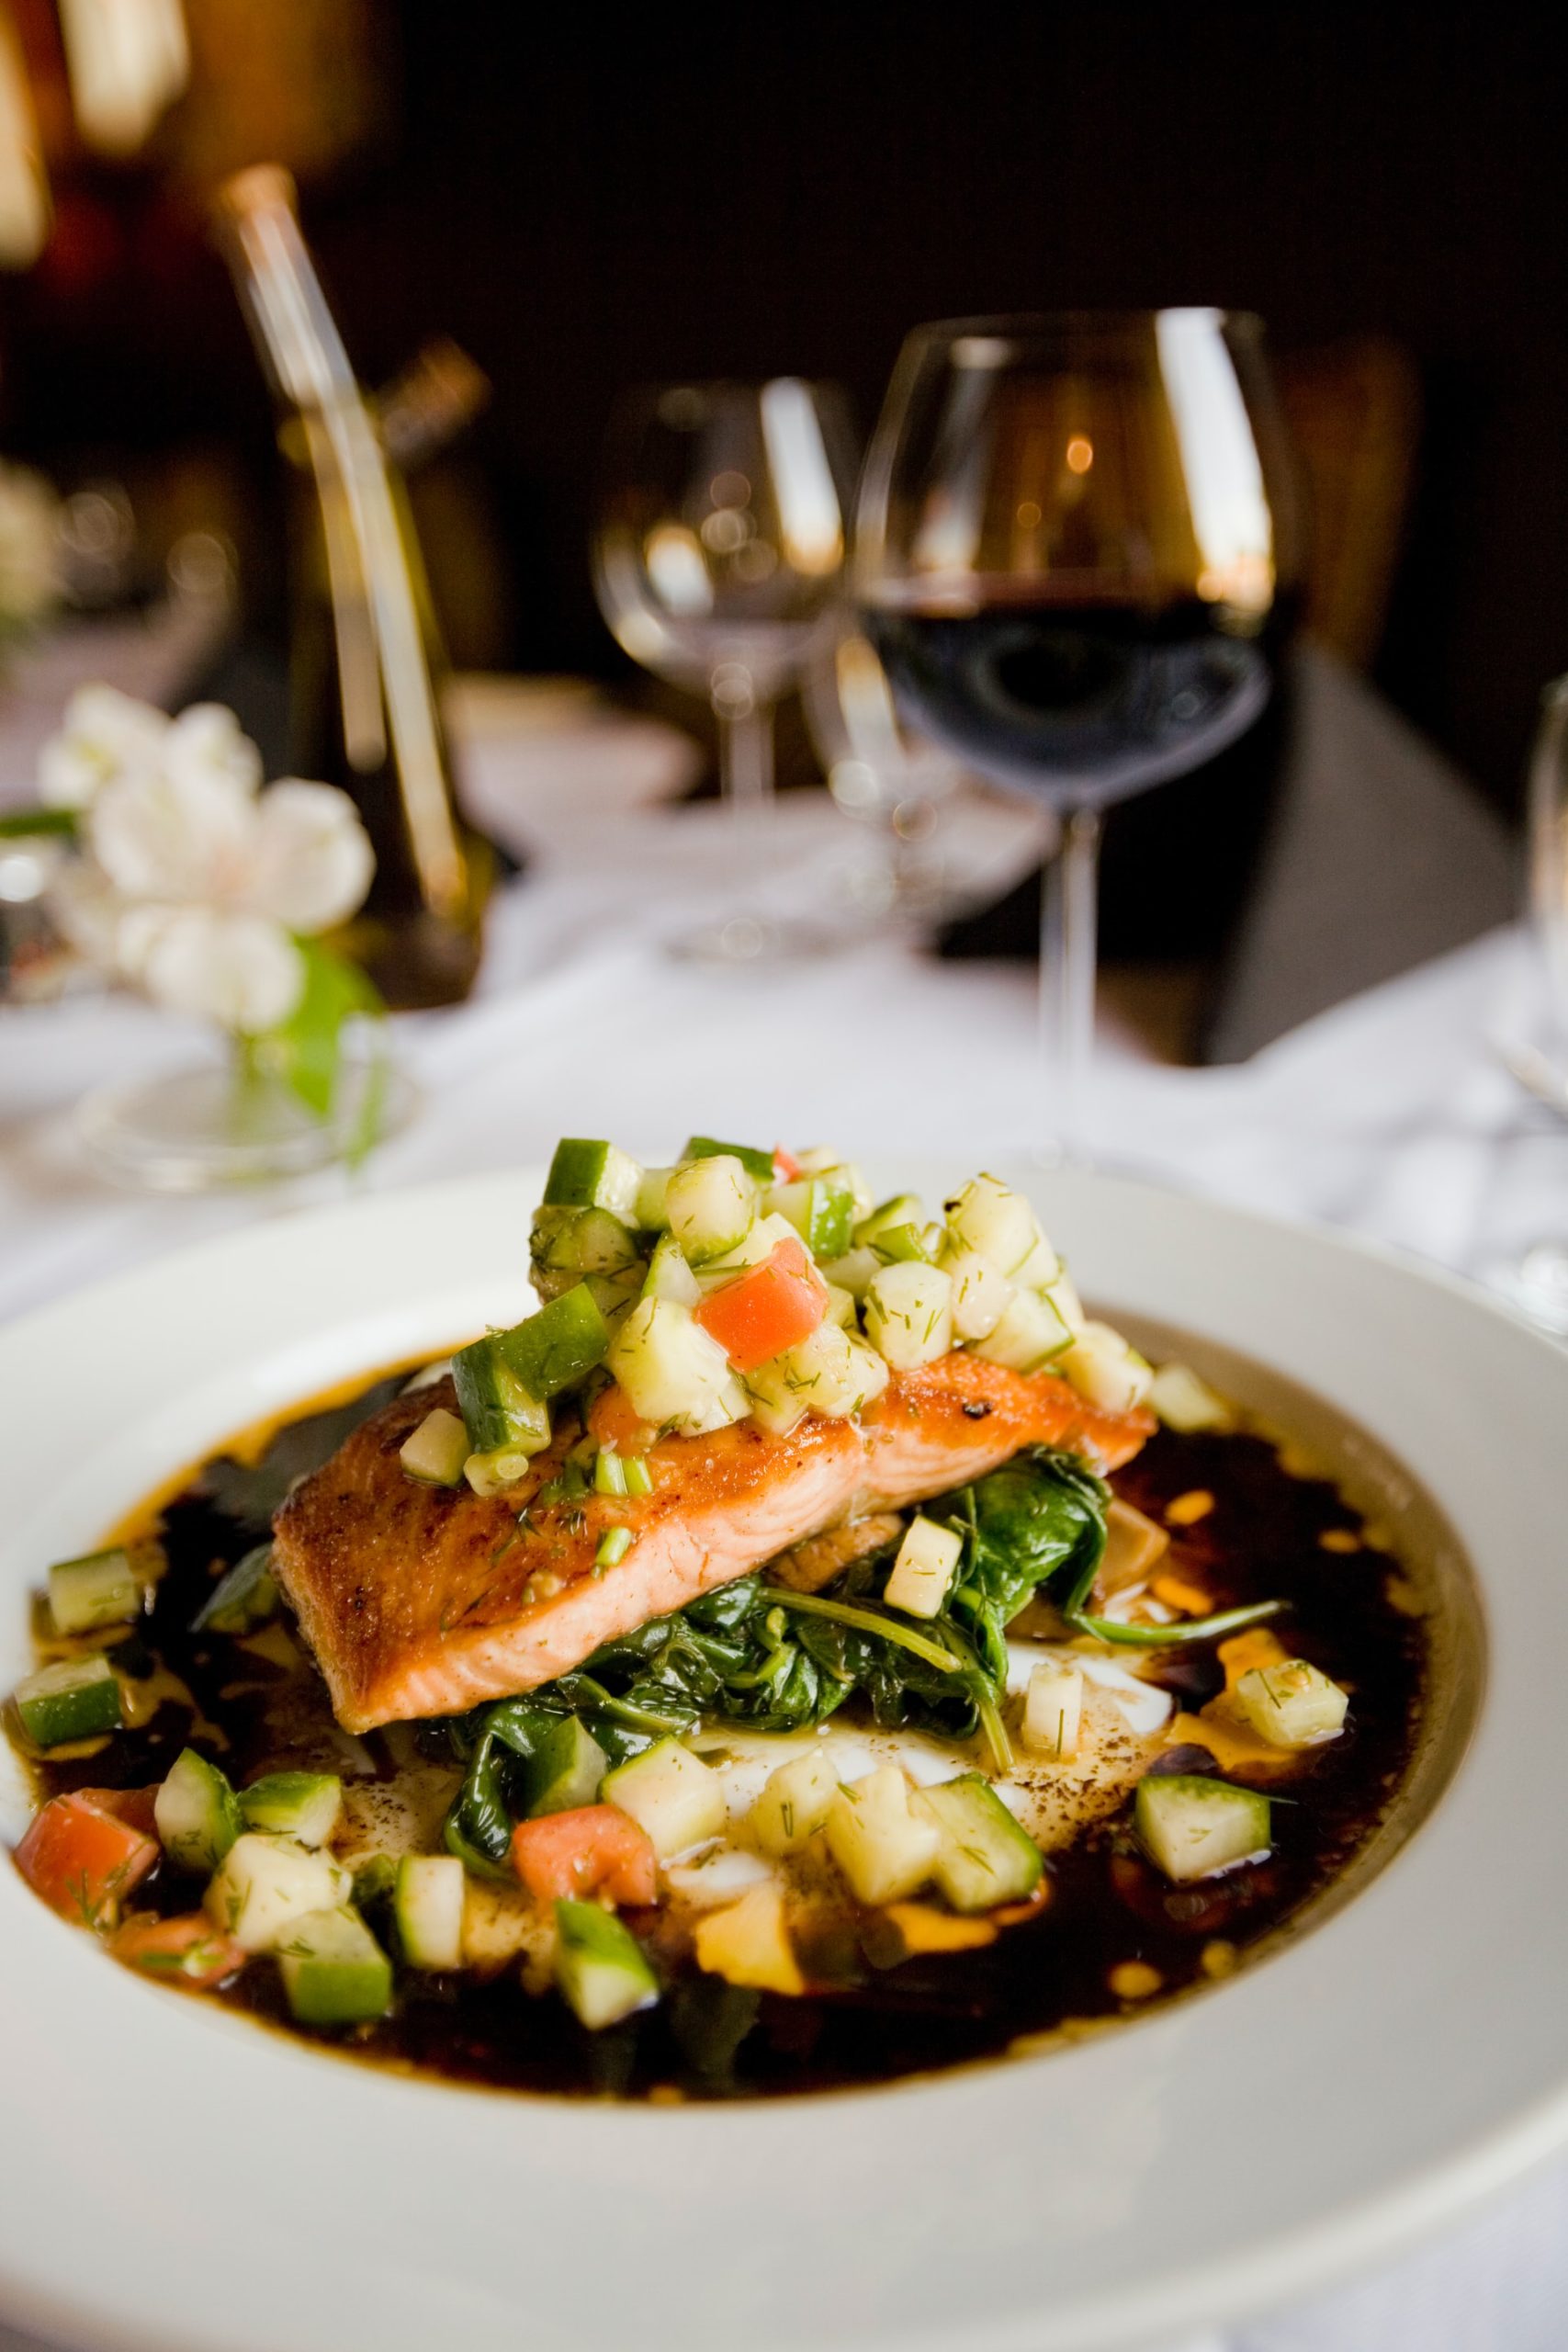 A salmon filet topped with tomato and cucumber relish on top of a bed of wilted greens sits on a table next to a glass of red wine.